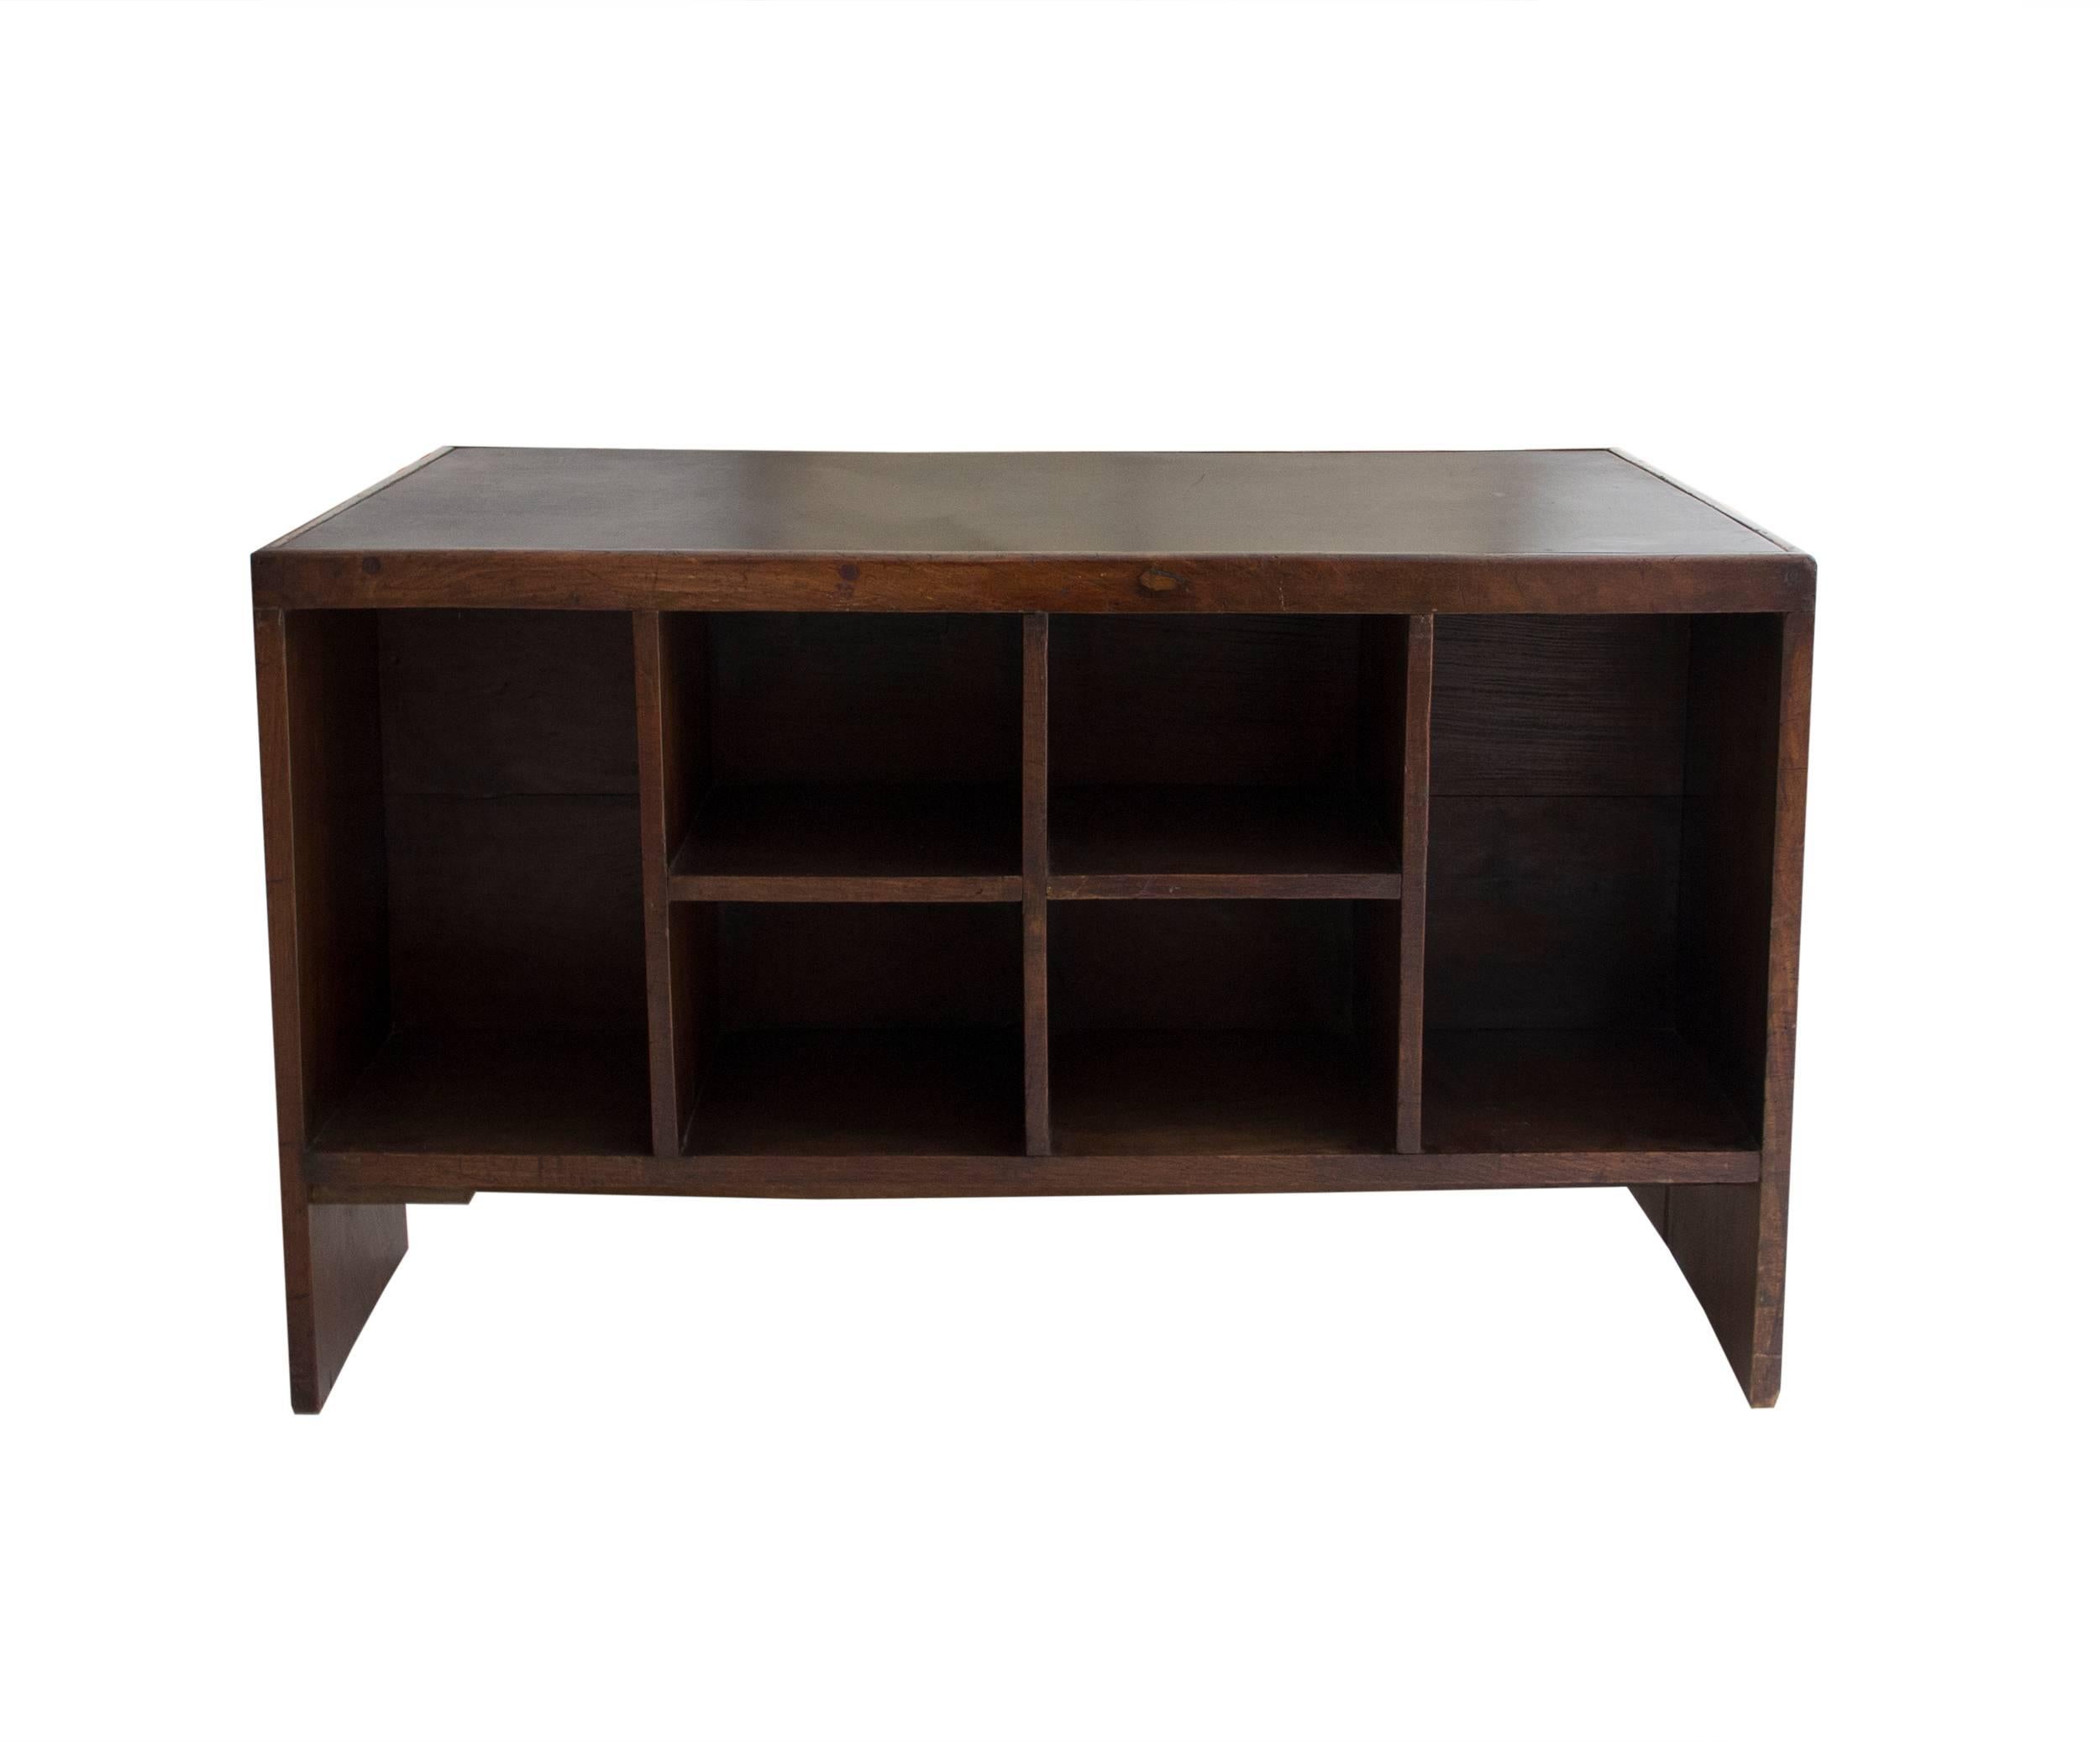 Pierre Jeanneret Office Desk for Chandigarh, Wood and Leather, circa 1950, India 3